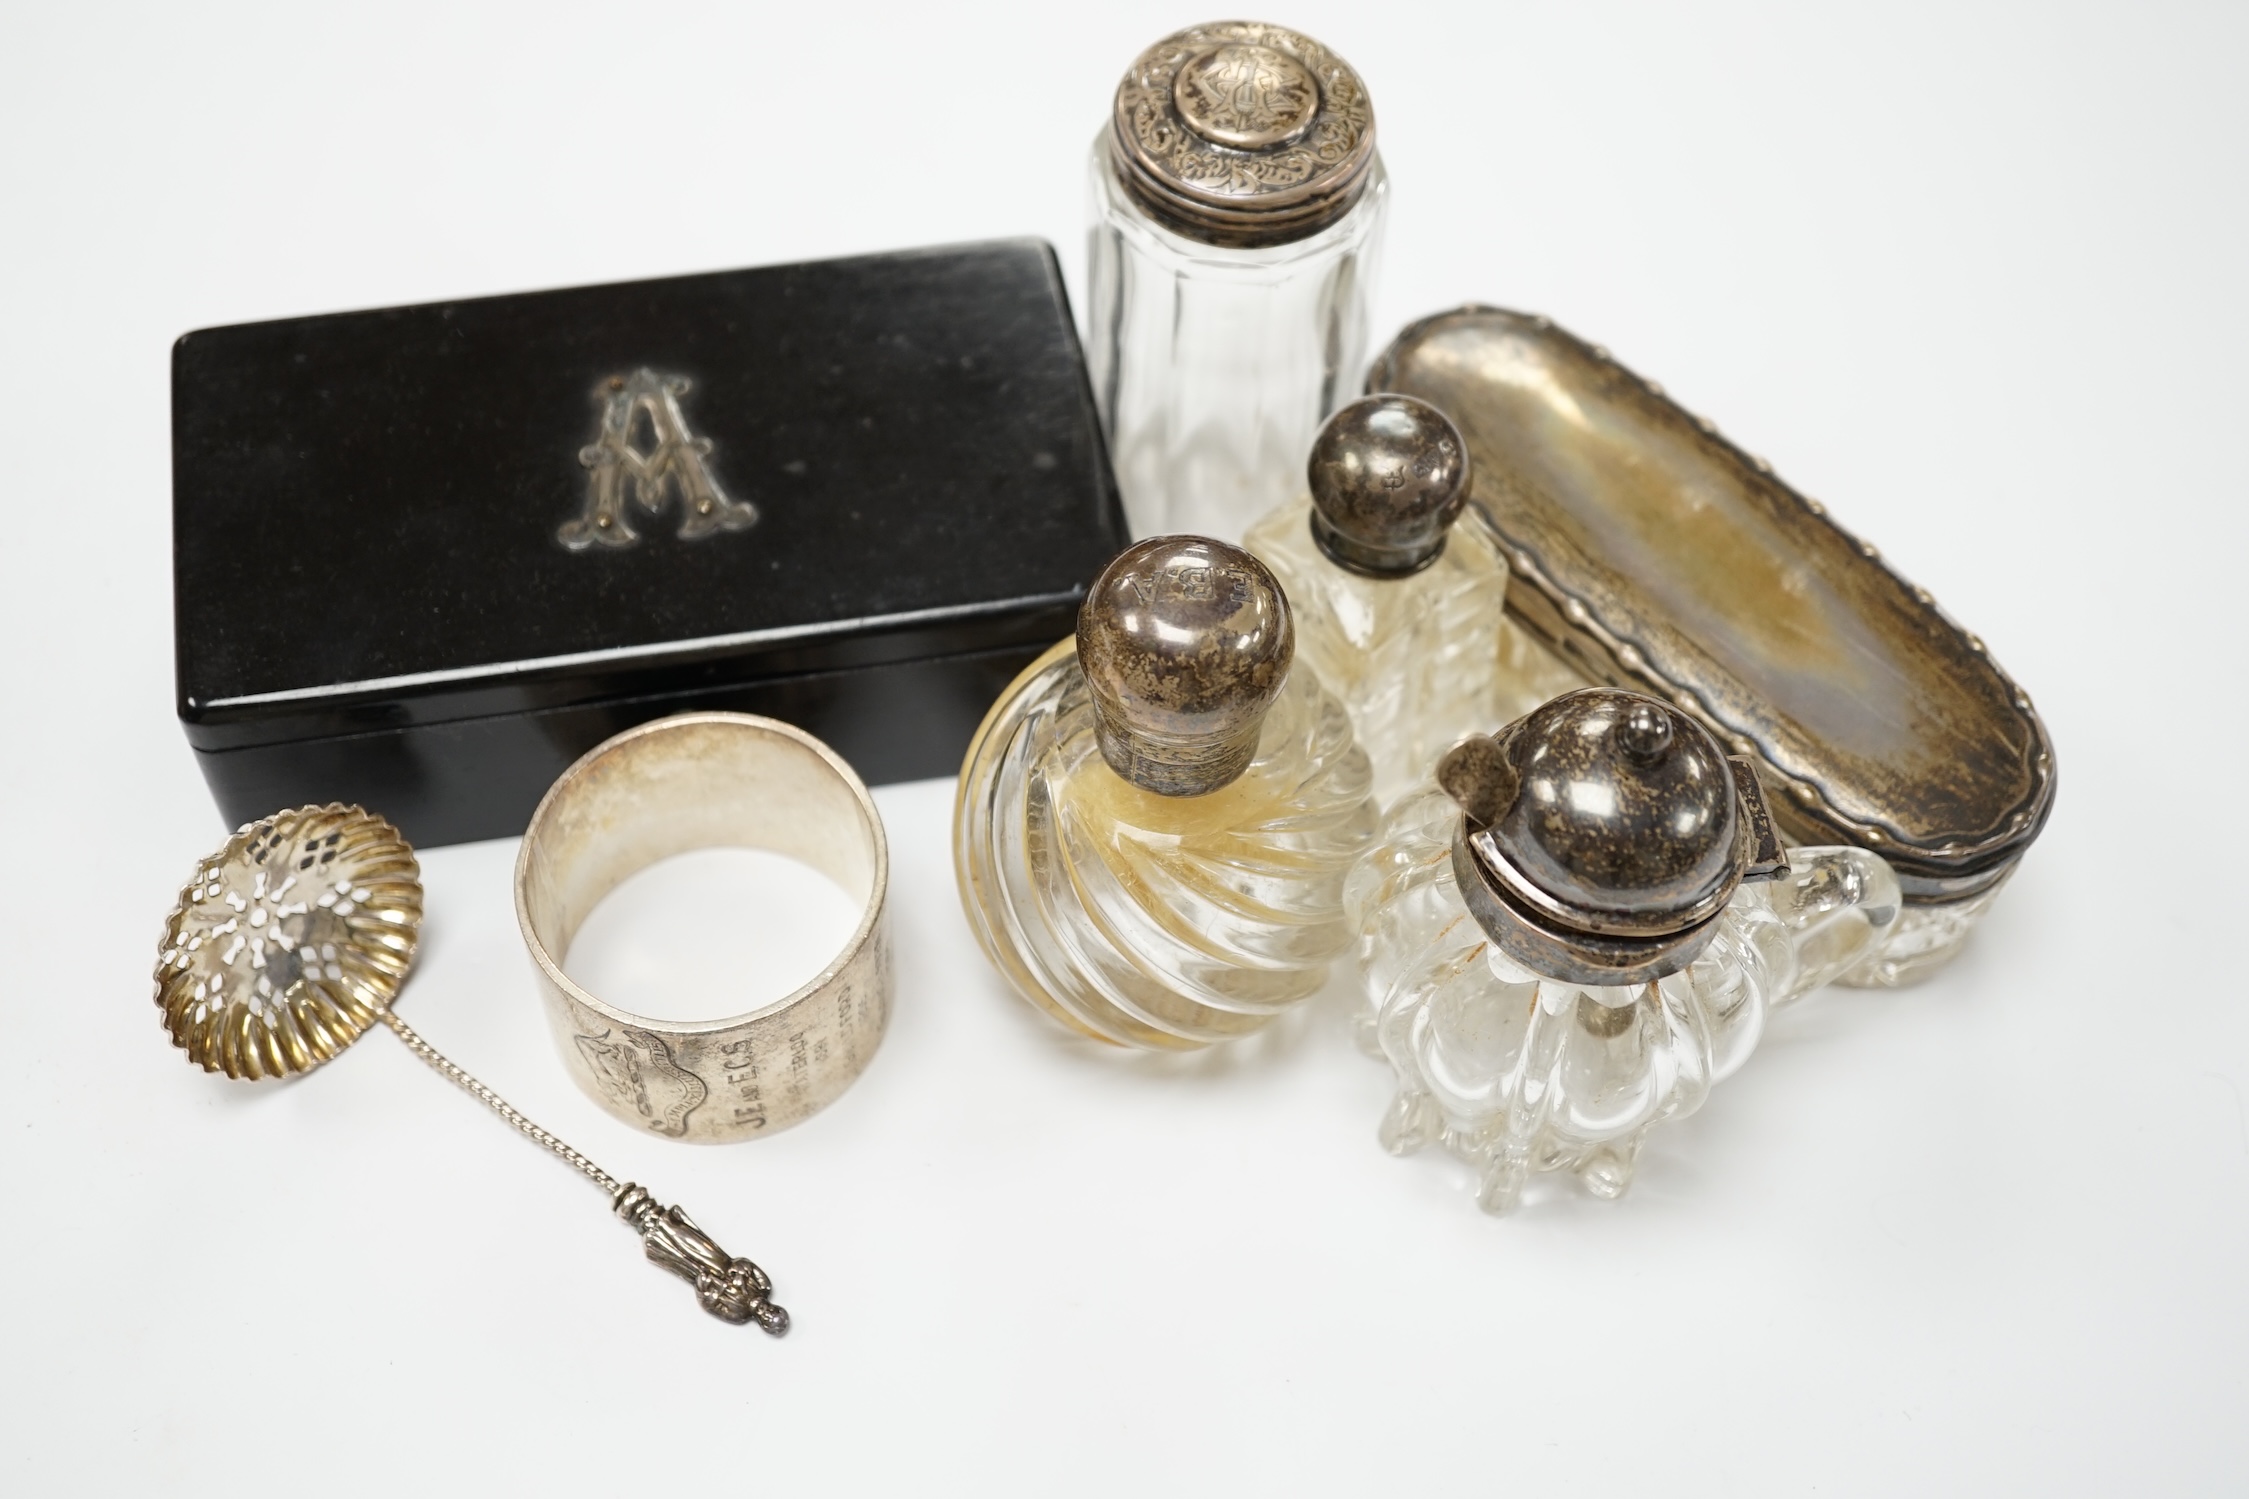 Four assorted silver mounted glass toilet jars, an Edwardian silver mounted glass mustard jar with spoon, a silver napkin ring, sifter spoon and ebony box. Condition - poor to fair